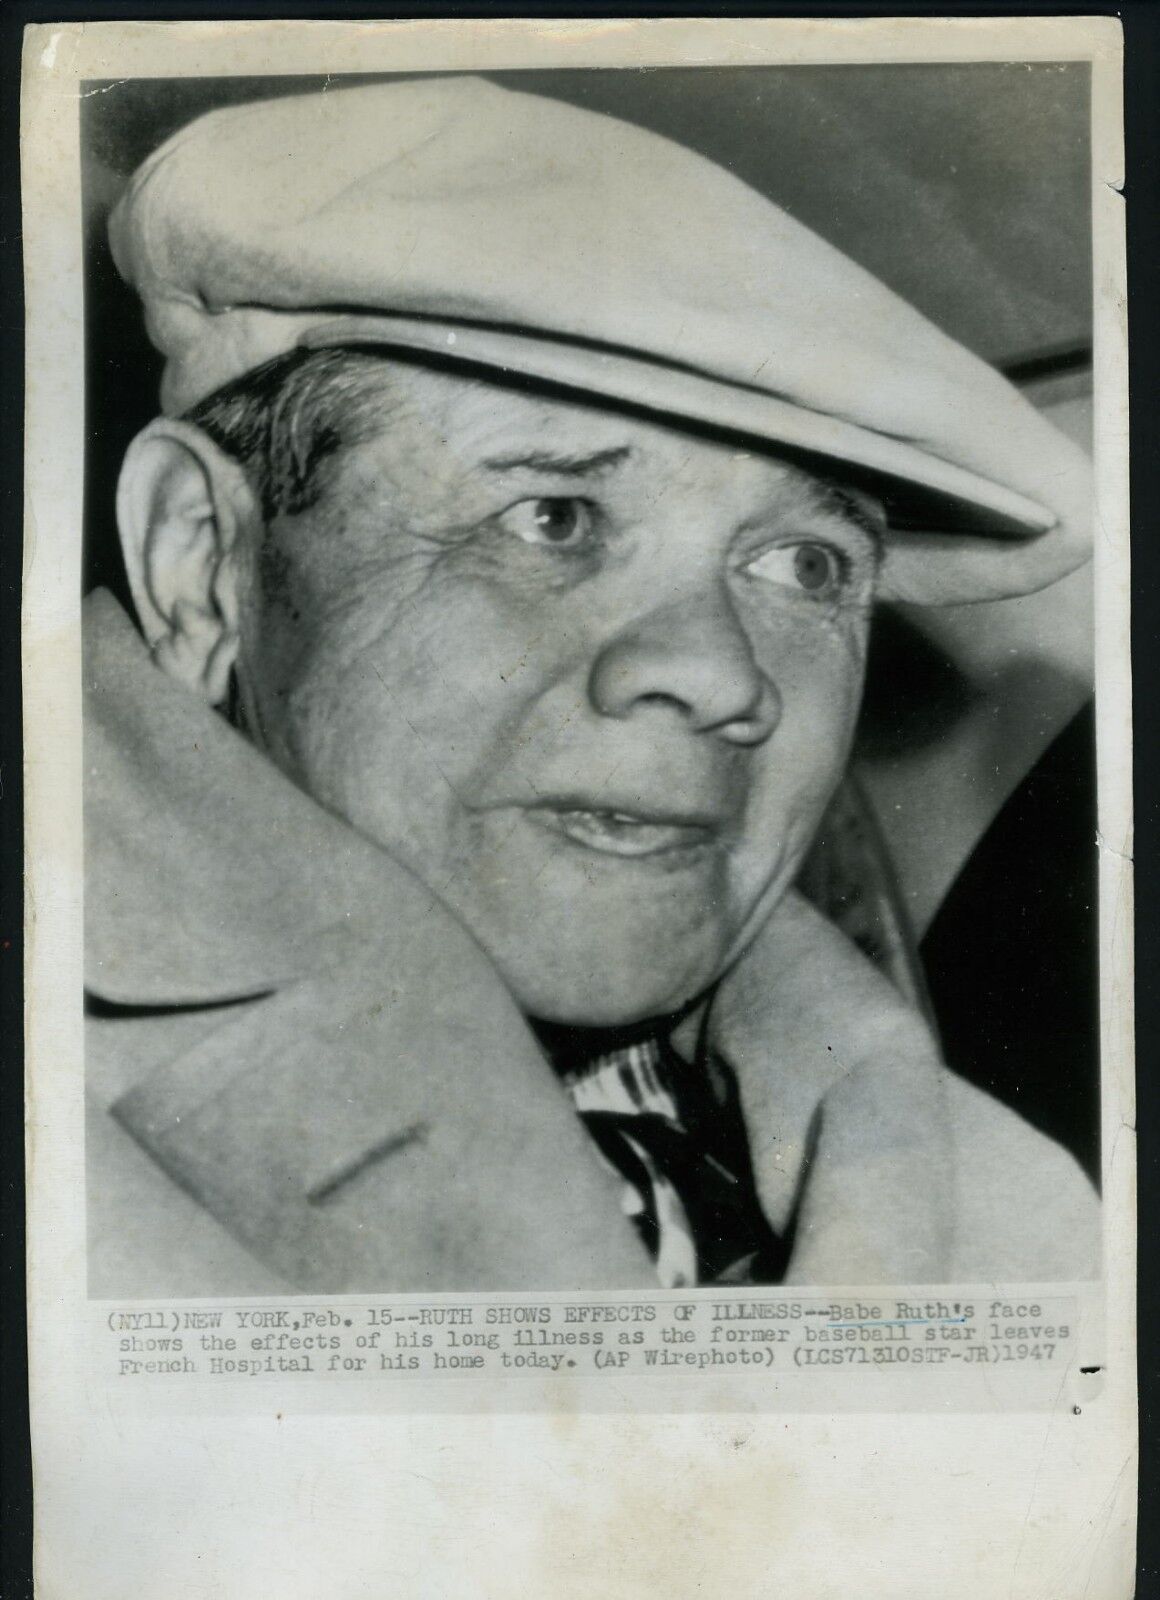 Babe Ruth leaves hospital 1947 Press Wire Photo Poster painting New York Yankees